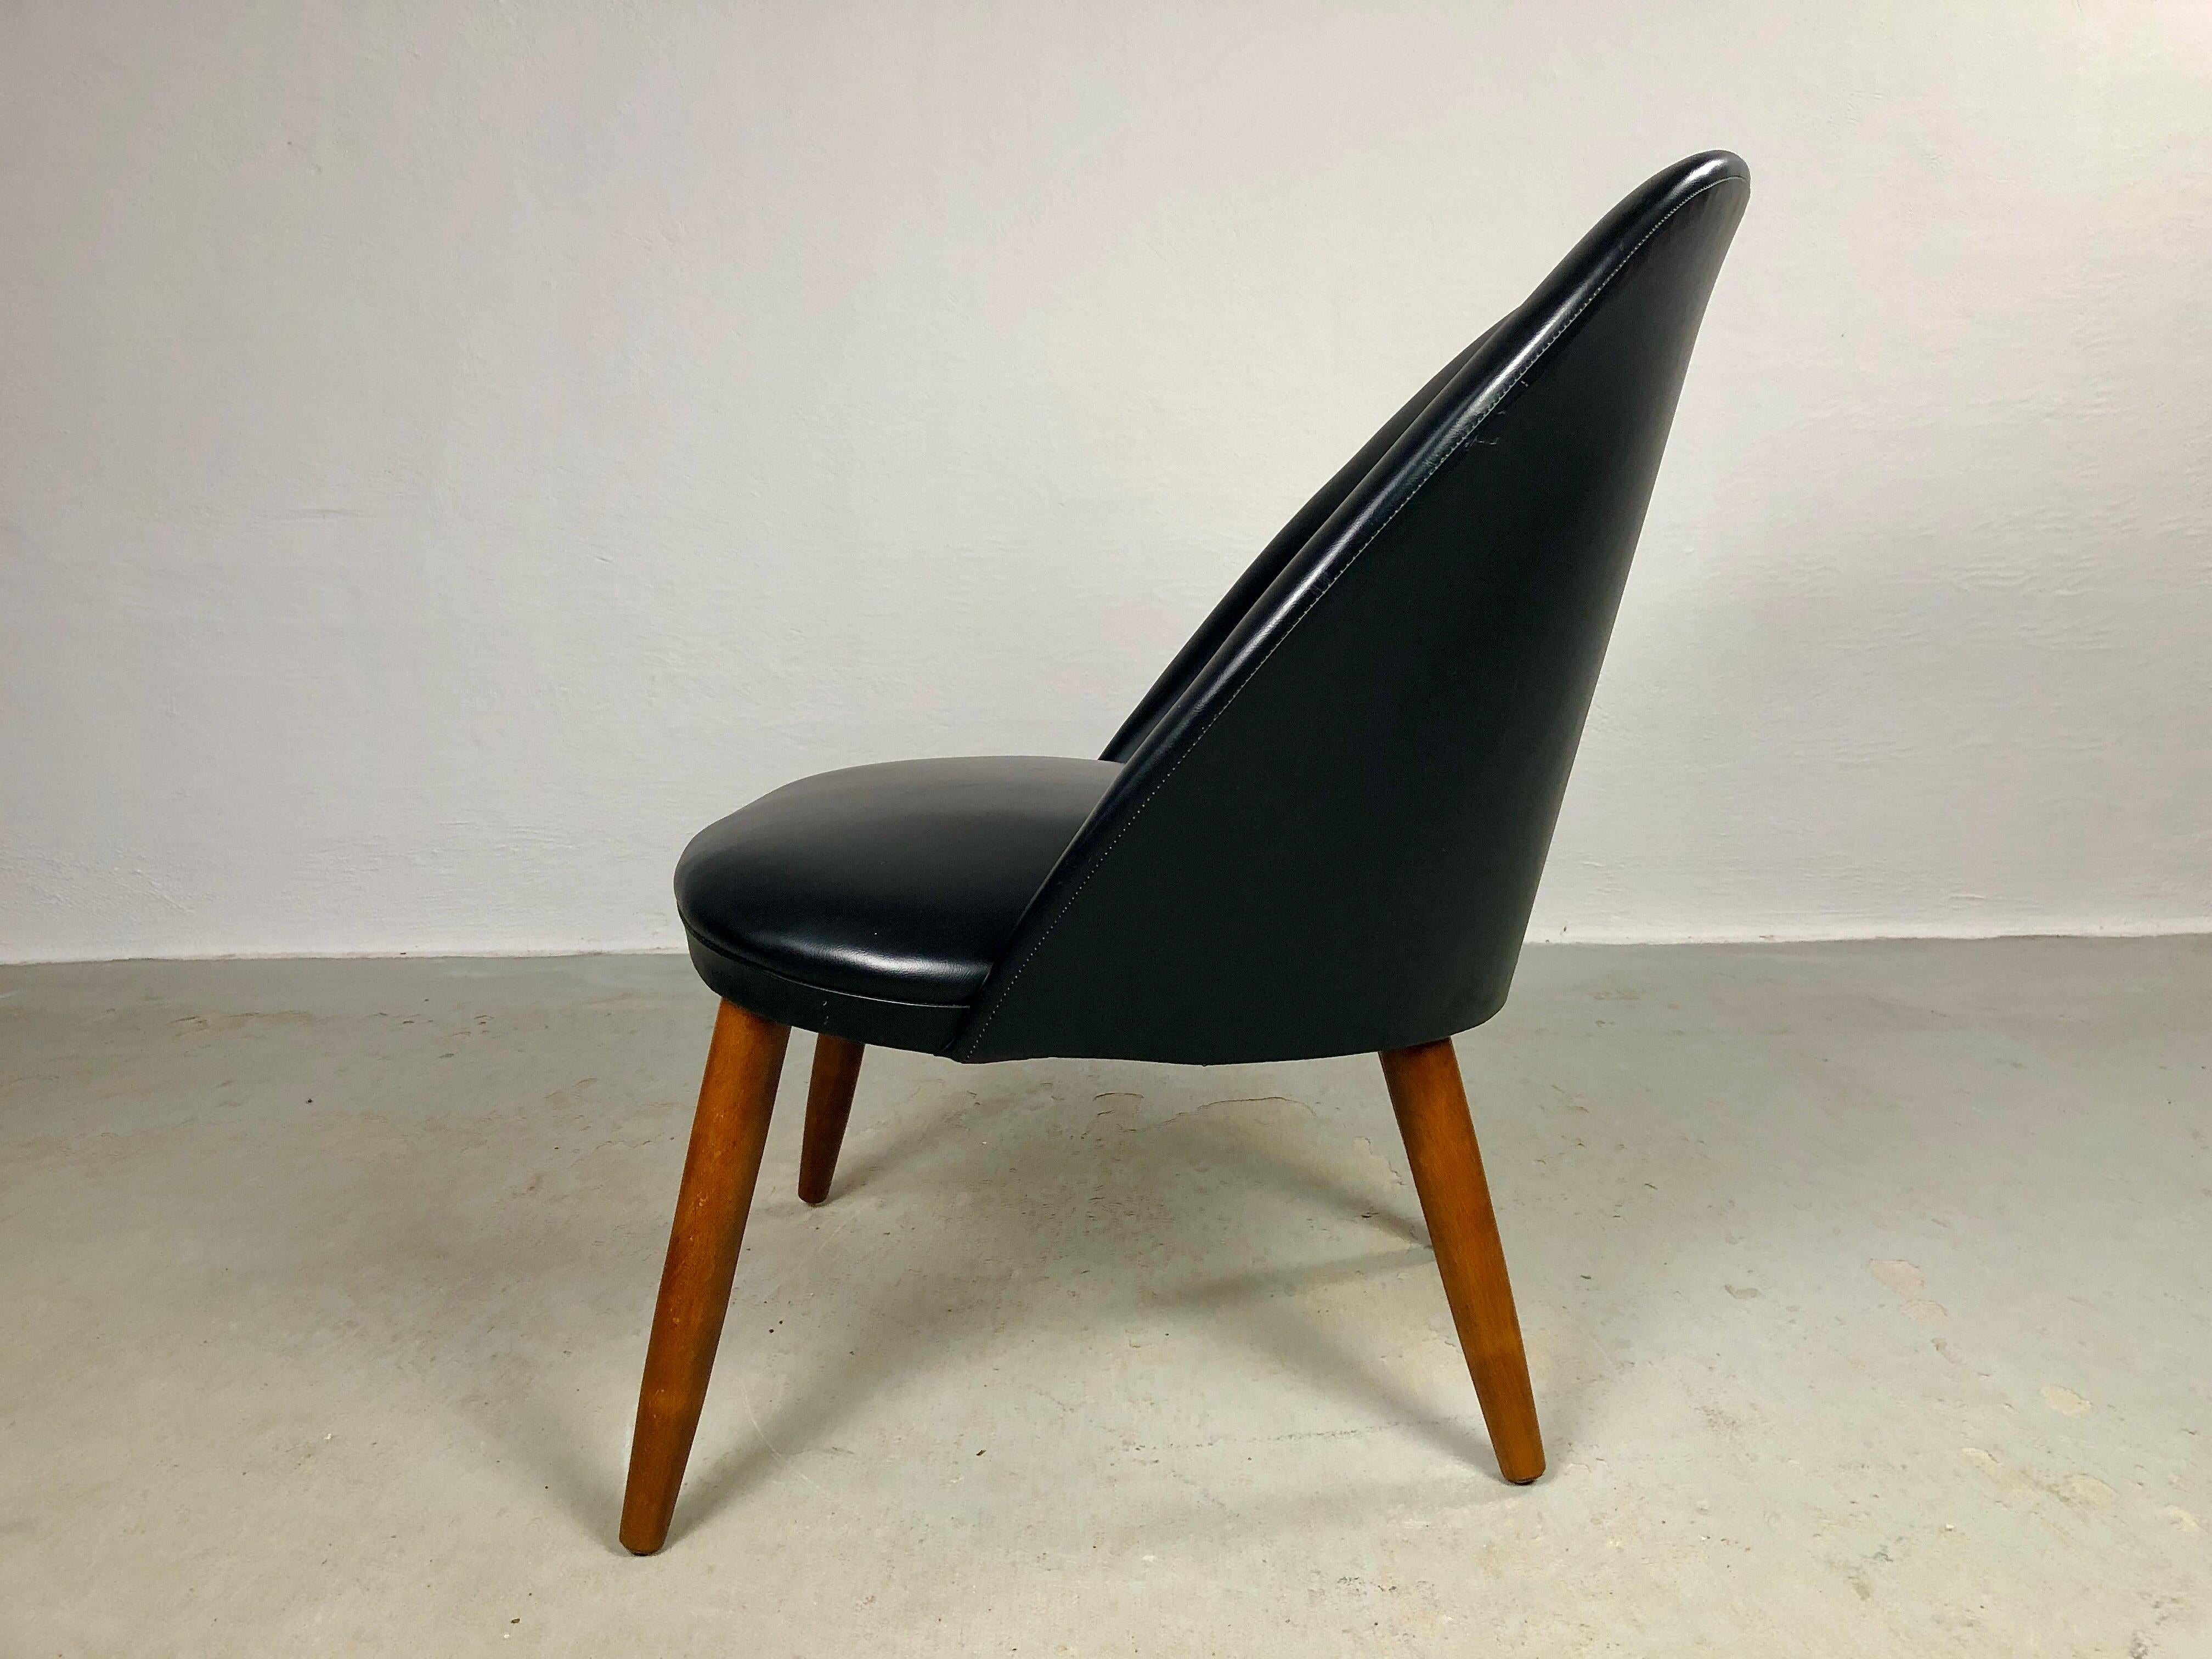 1960's Fully Restored Danish Lounge Chair Reupholstered in Black Leather In Excellent Condition For Sale In Knebel, DK